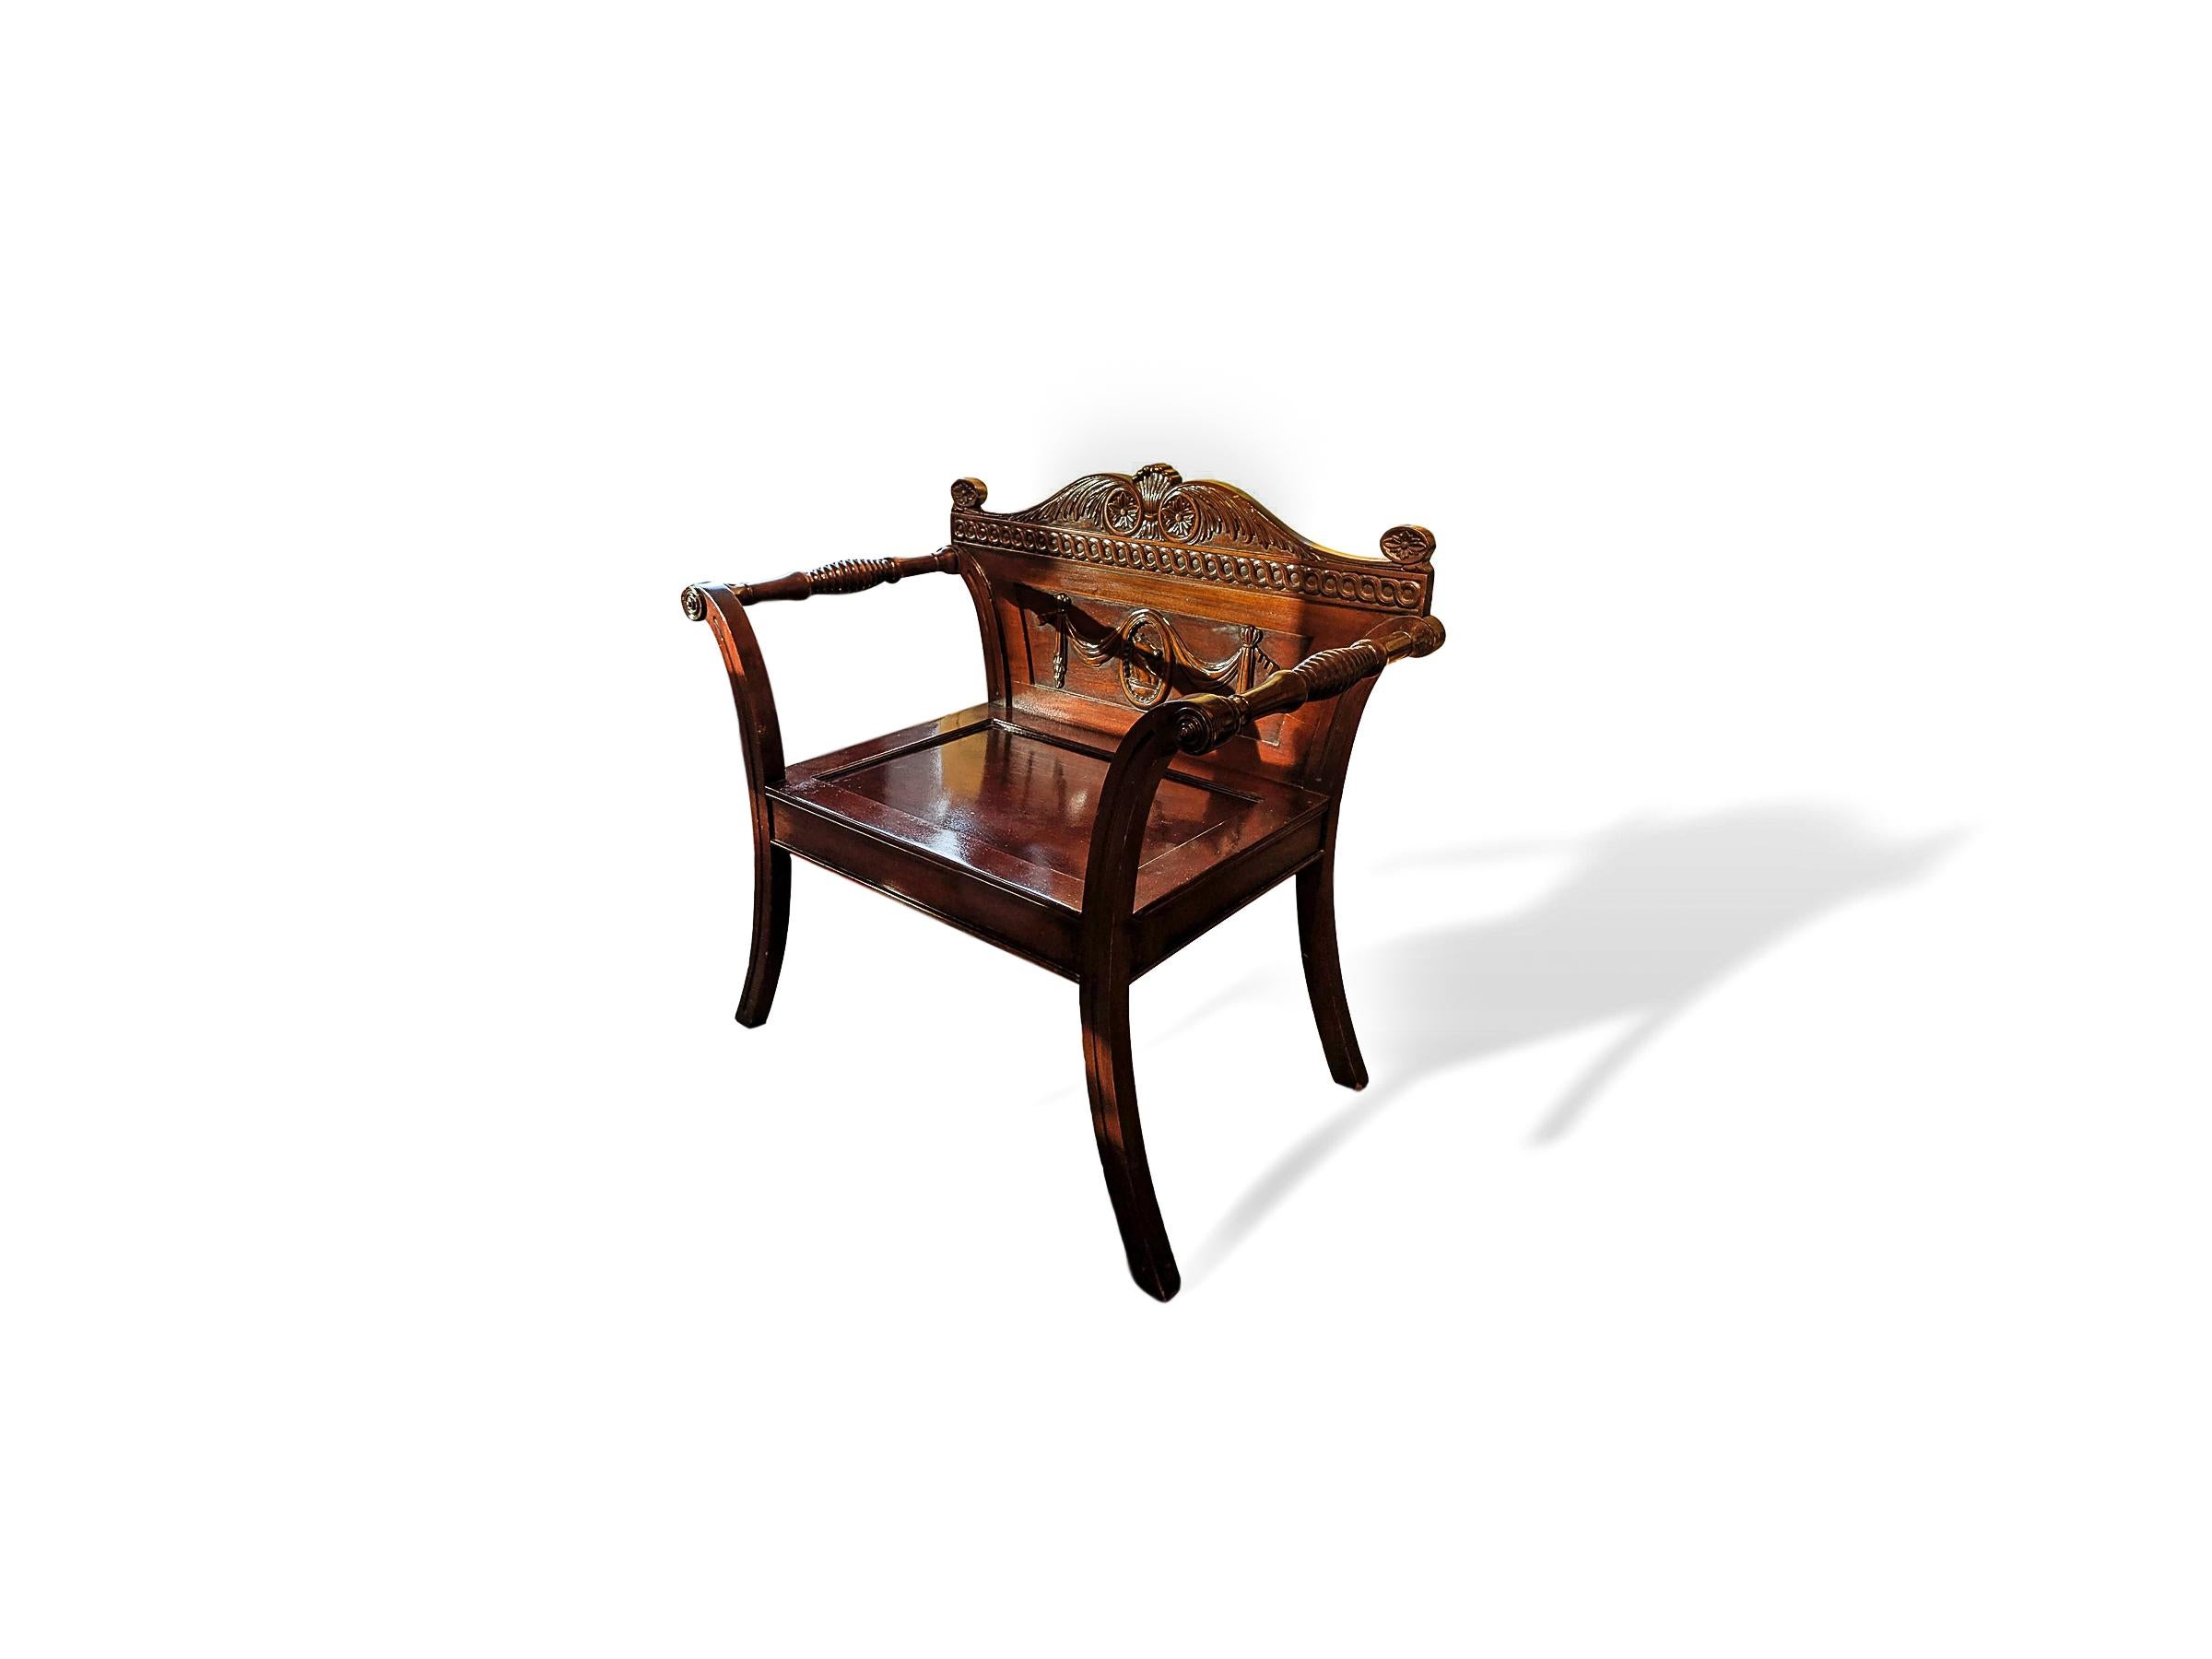 19th century carved mahogany Irish hall chair designed by celebrated 18th century architect and designer James Wyatt. Wyatt designed this chair for the hallway of Castle Coole, Co. Fermanagh, circa 1790. This is a later 19th century copy of the